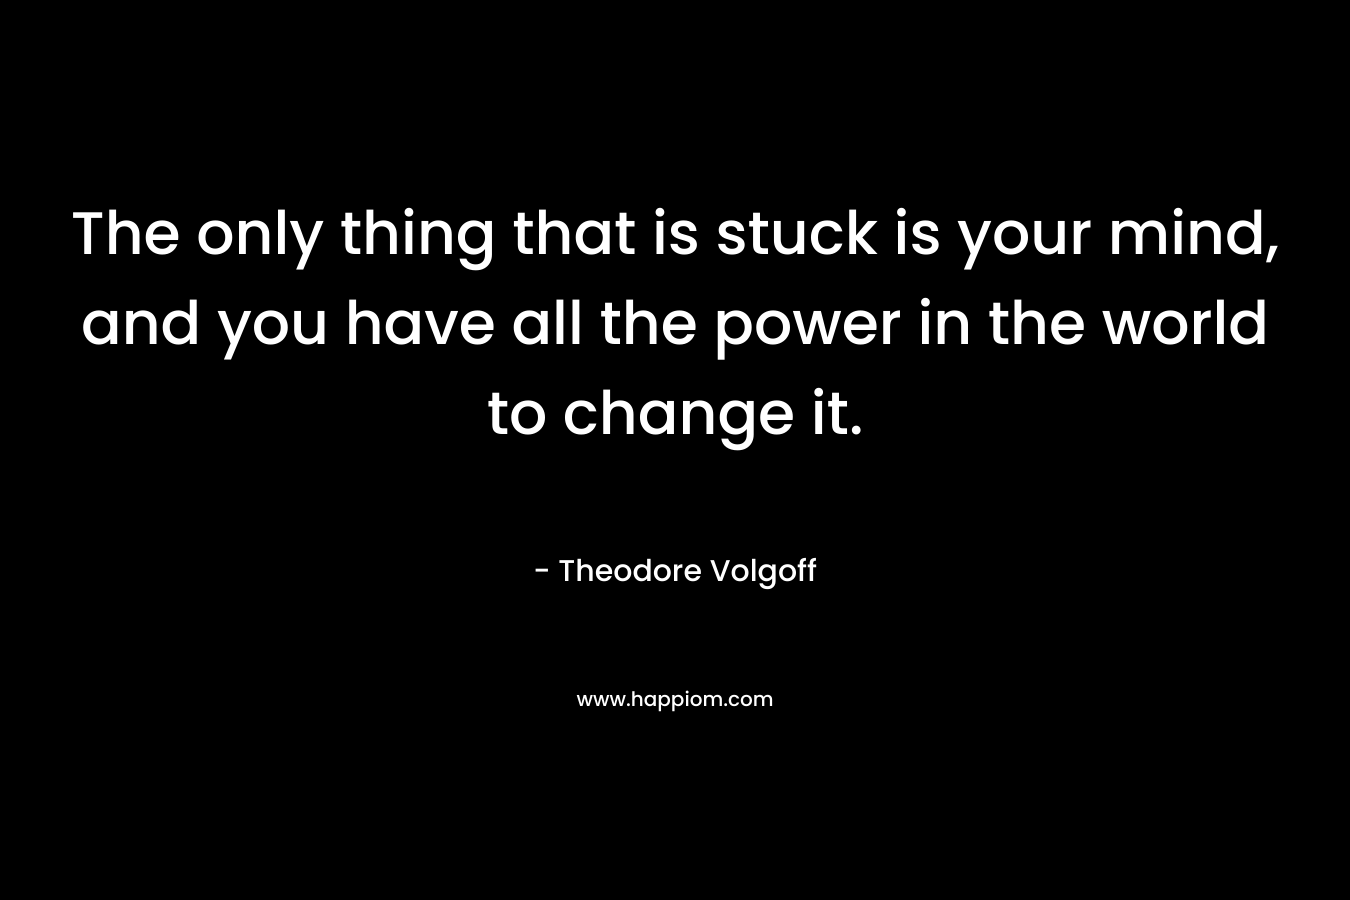 The only thing that is stuck is your mind, and you have all the power in the world to change it.